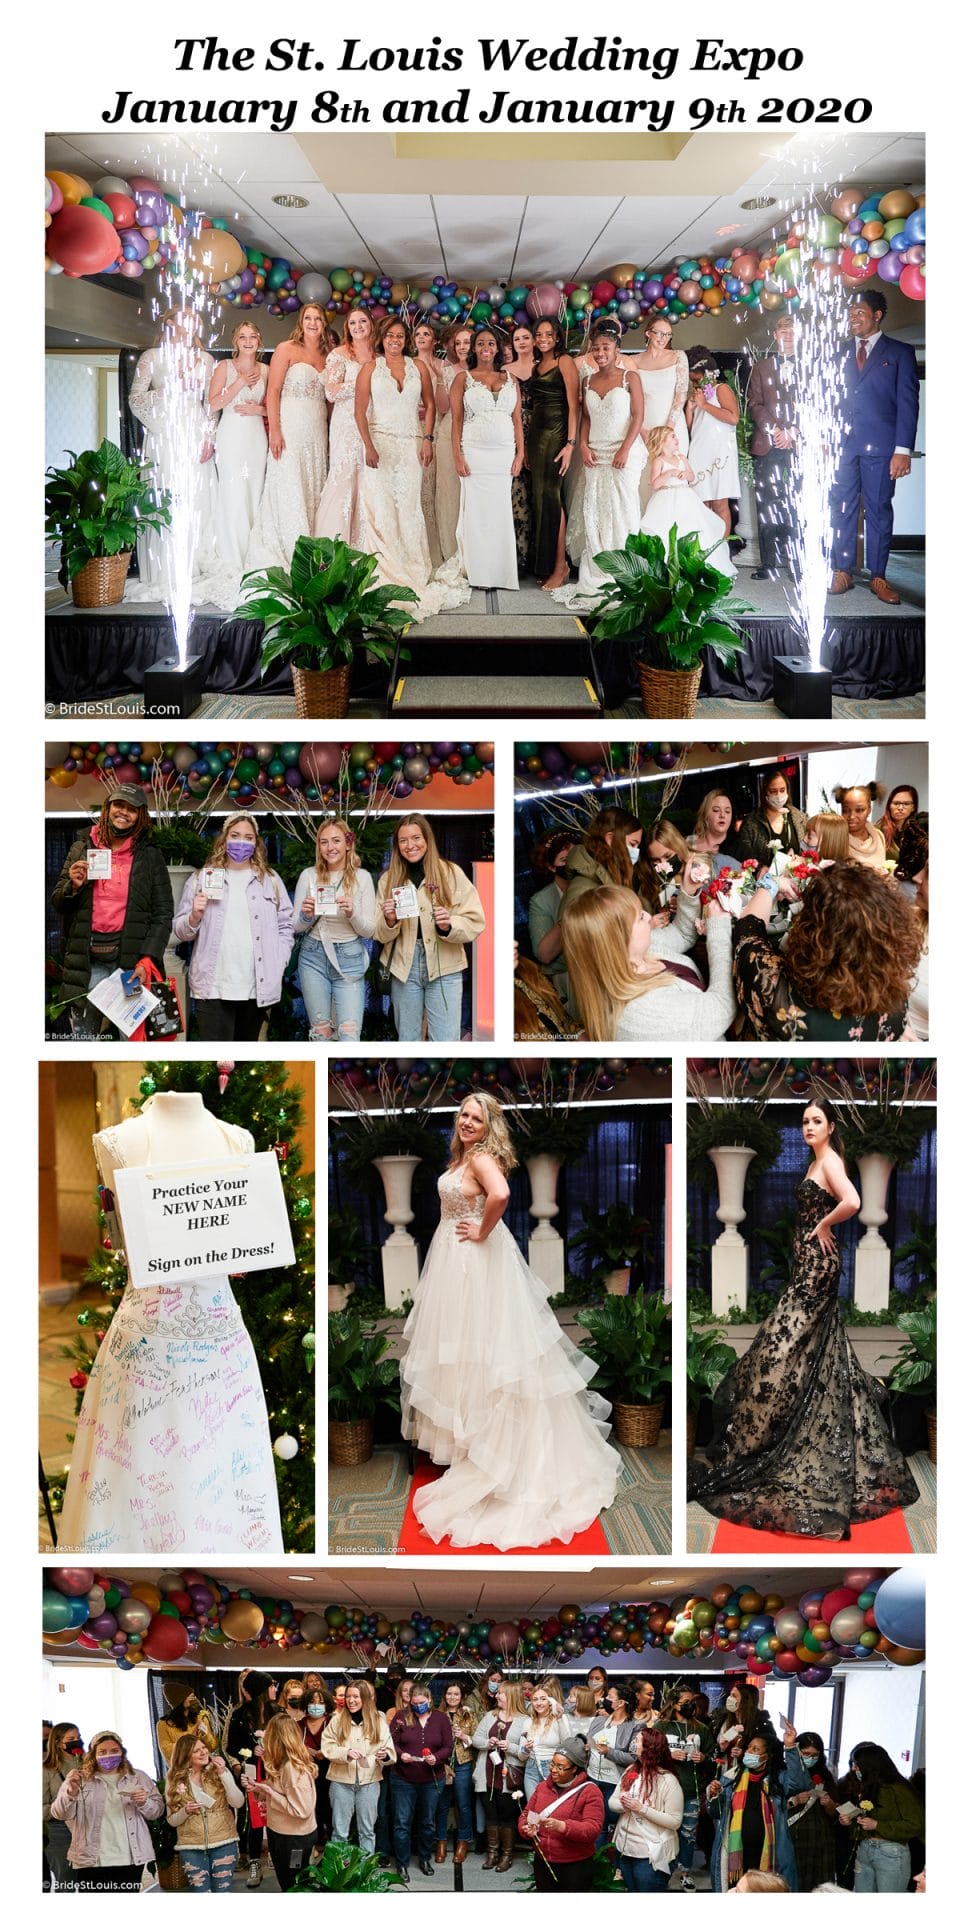 The St. Louis Bridal Show at The Christy Feb. 27 2022